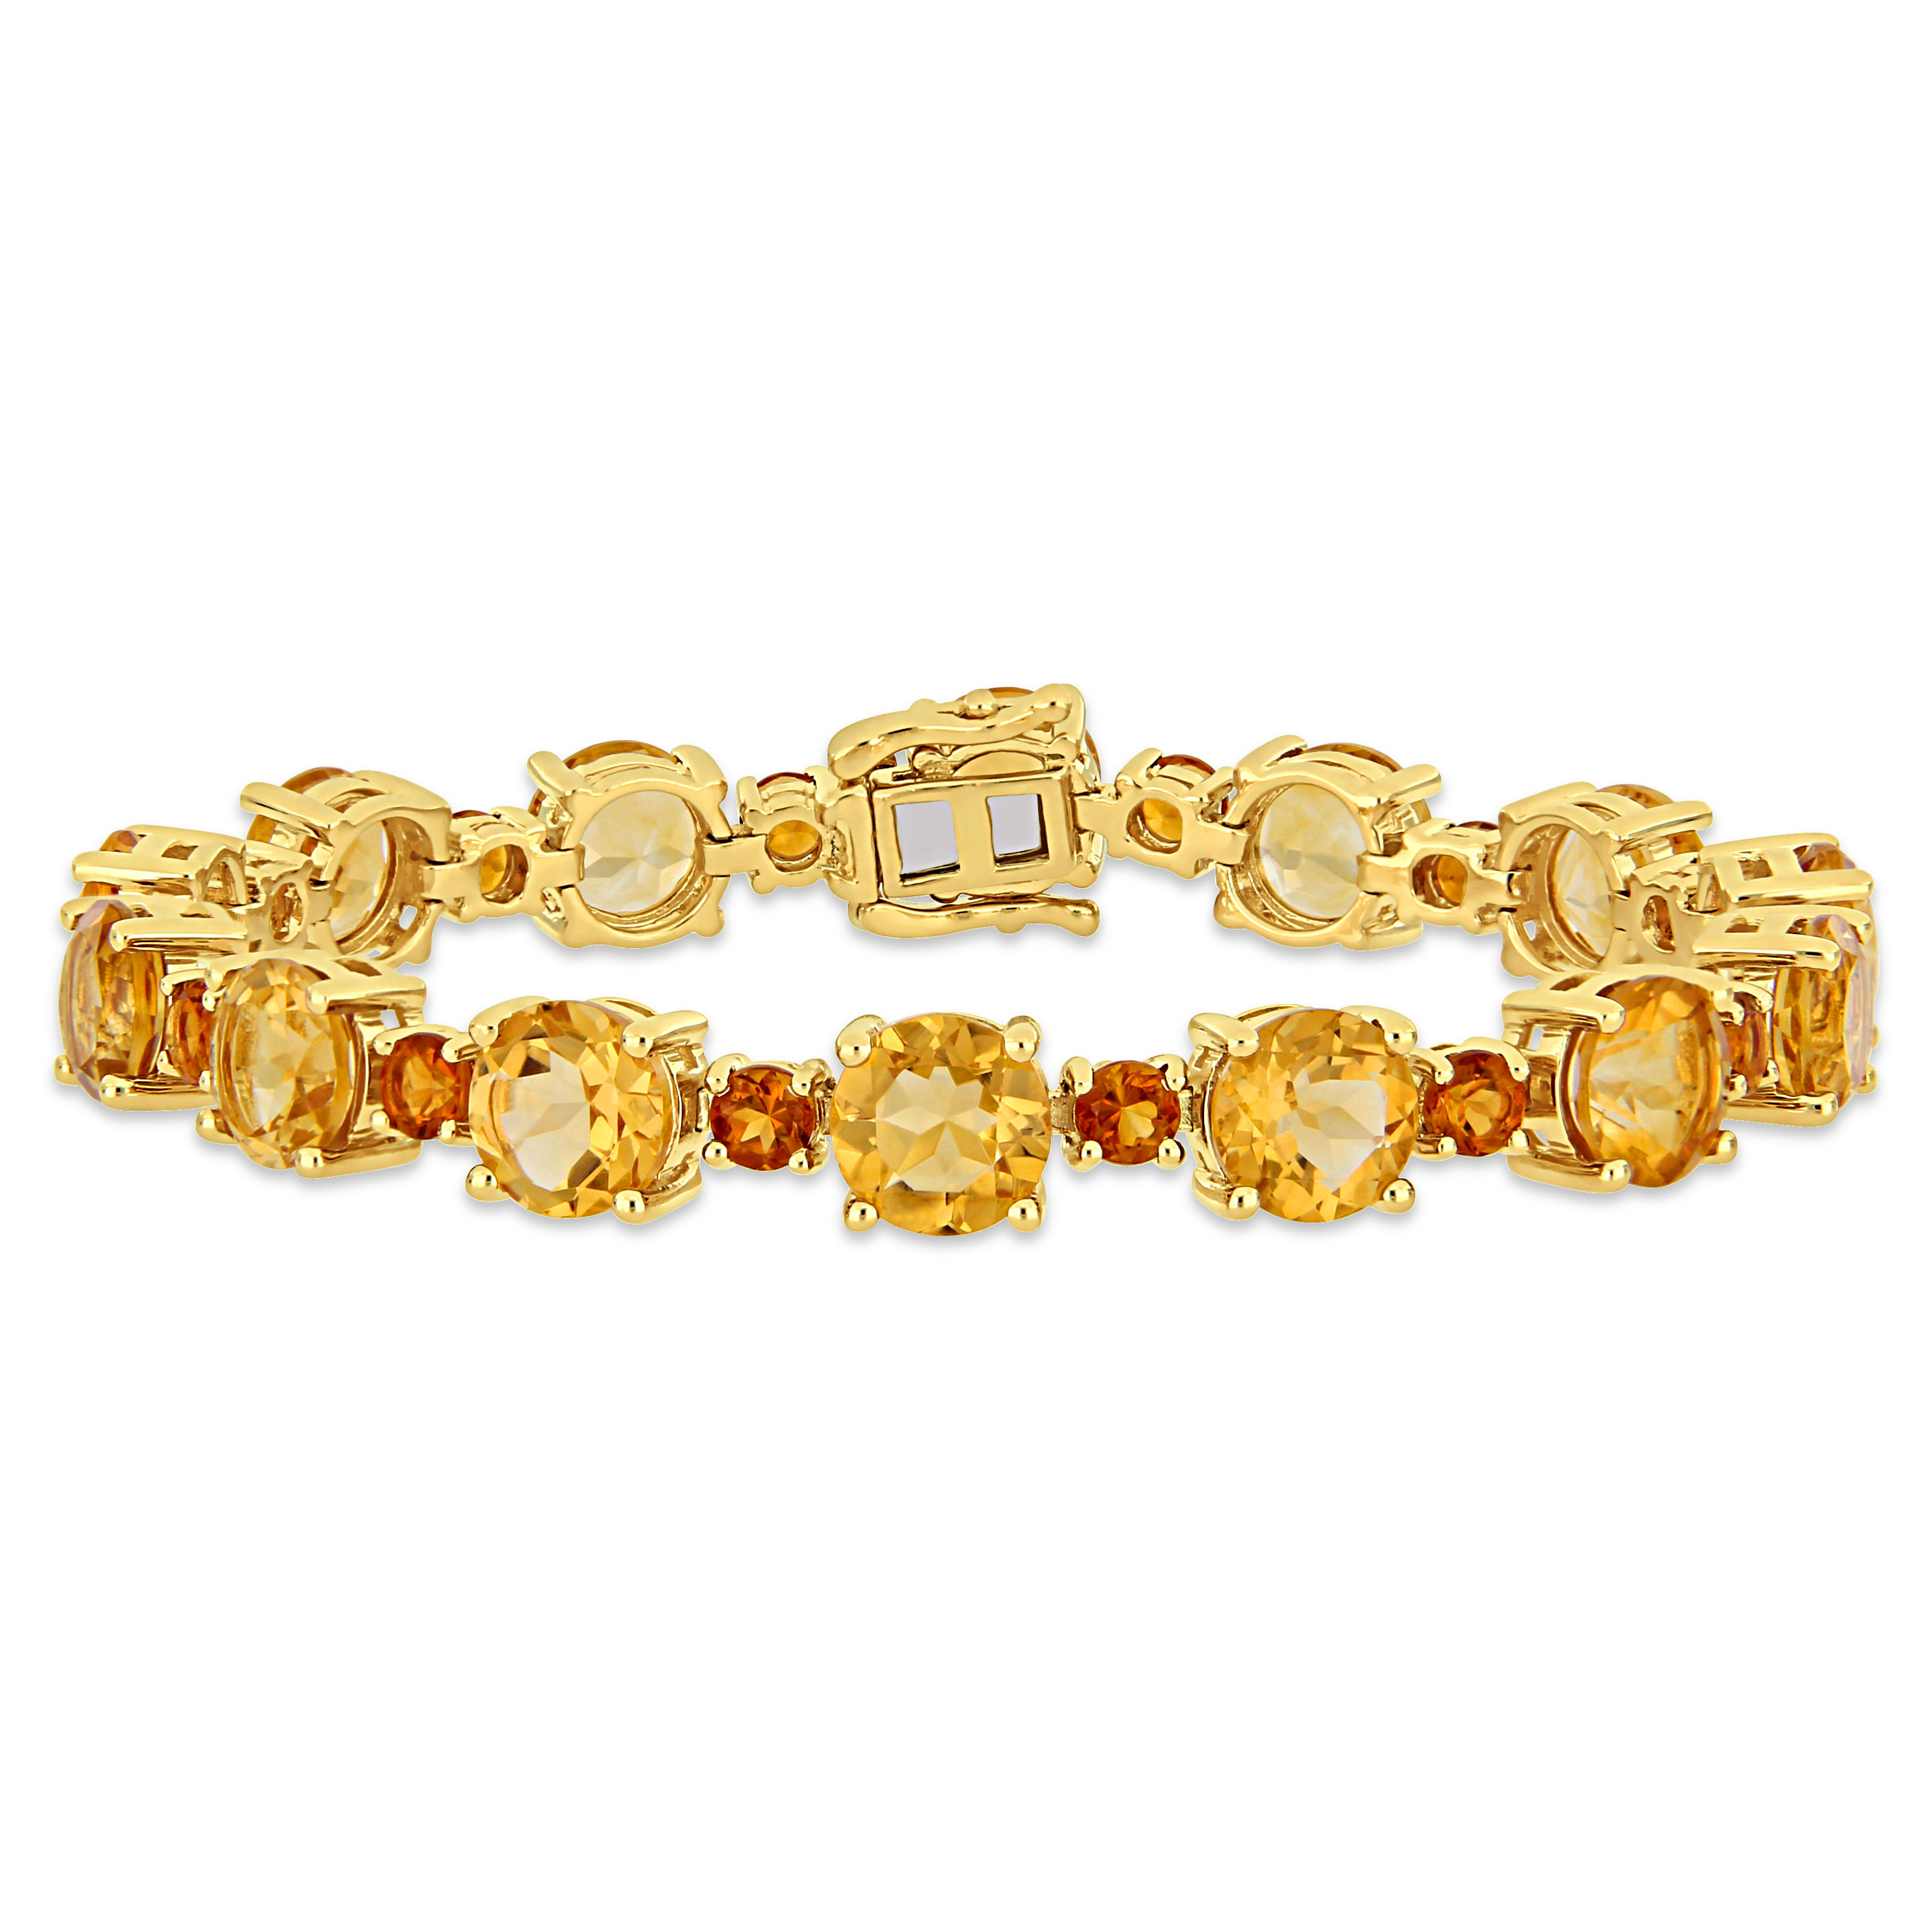 29 3/8 CT TGW Citrine and Madeira Citrine Tennis Bracelet in Yellow Gold Plated Sterling Silver - 7.25 in.